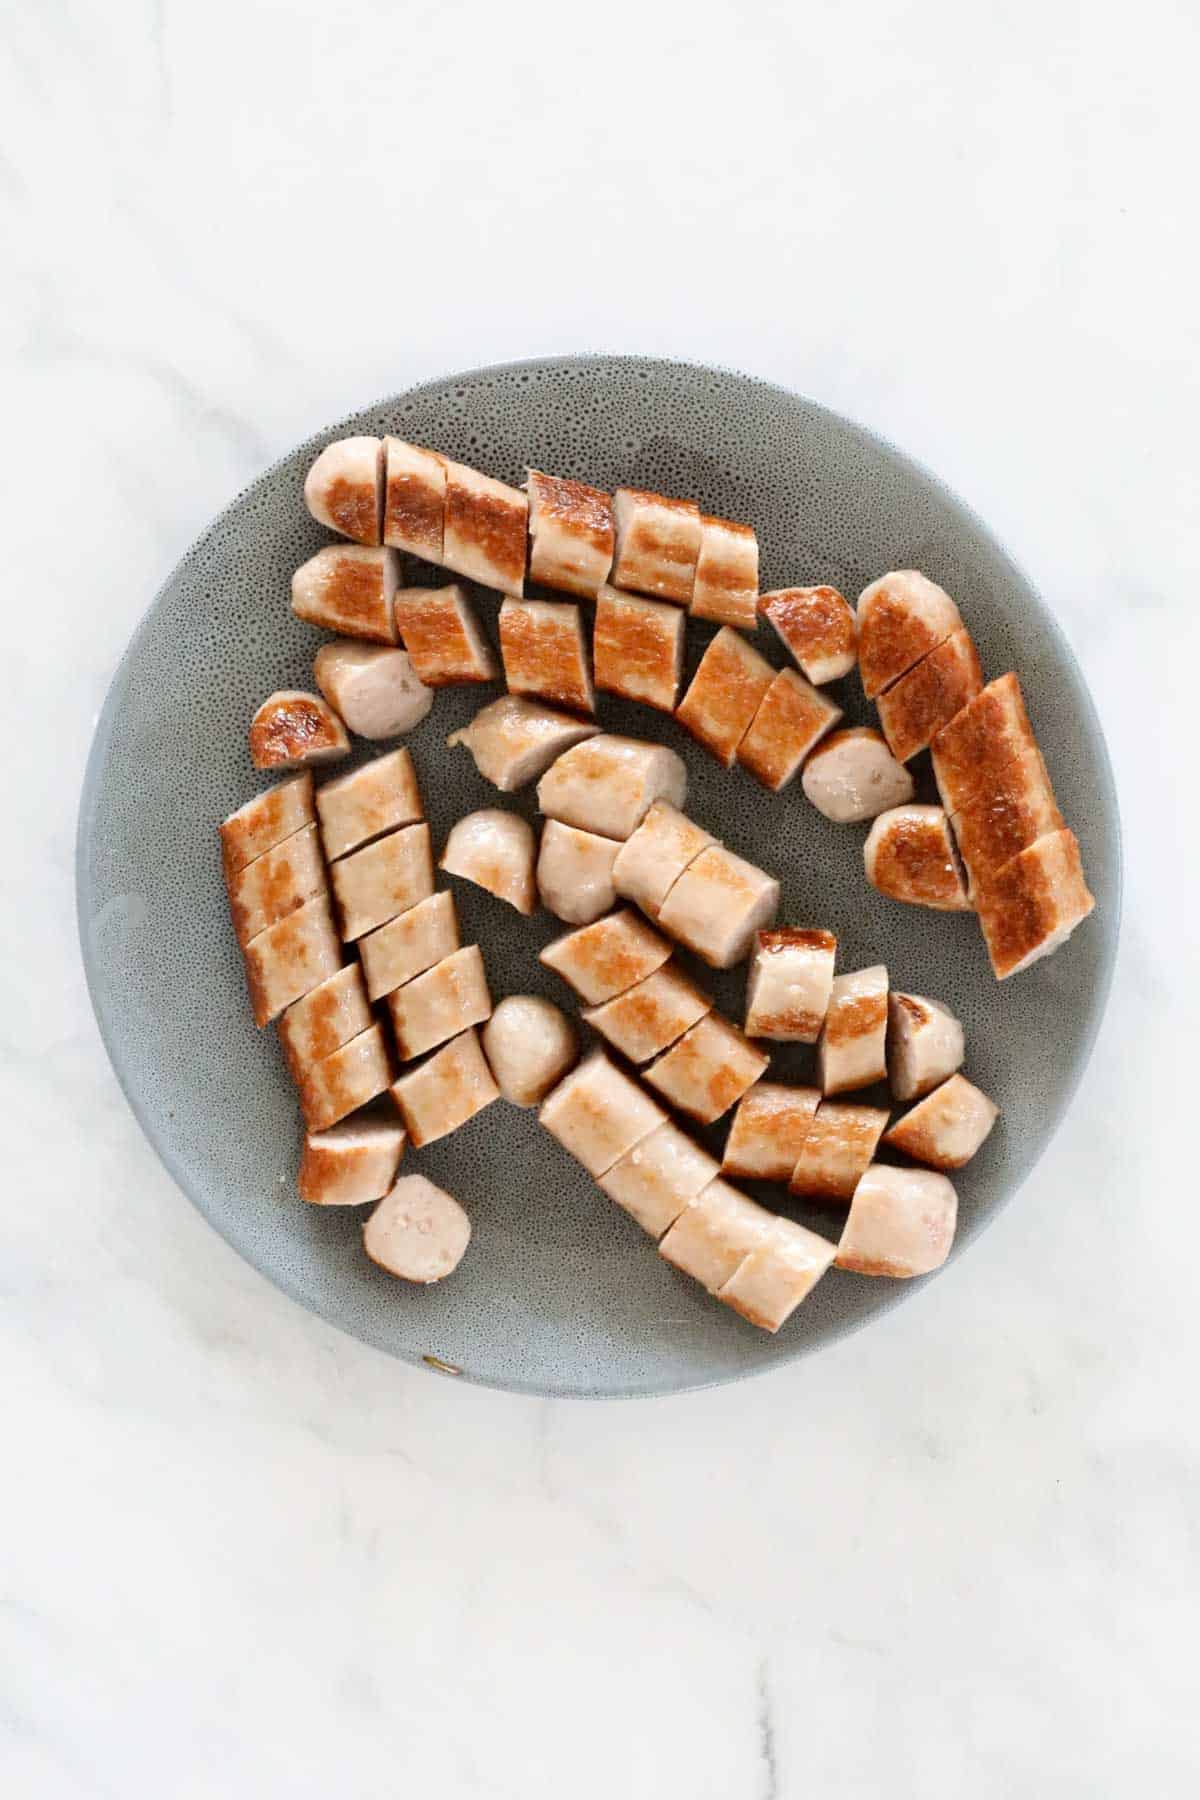 Browned sausages cut into chunks.